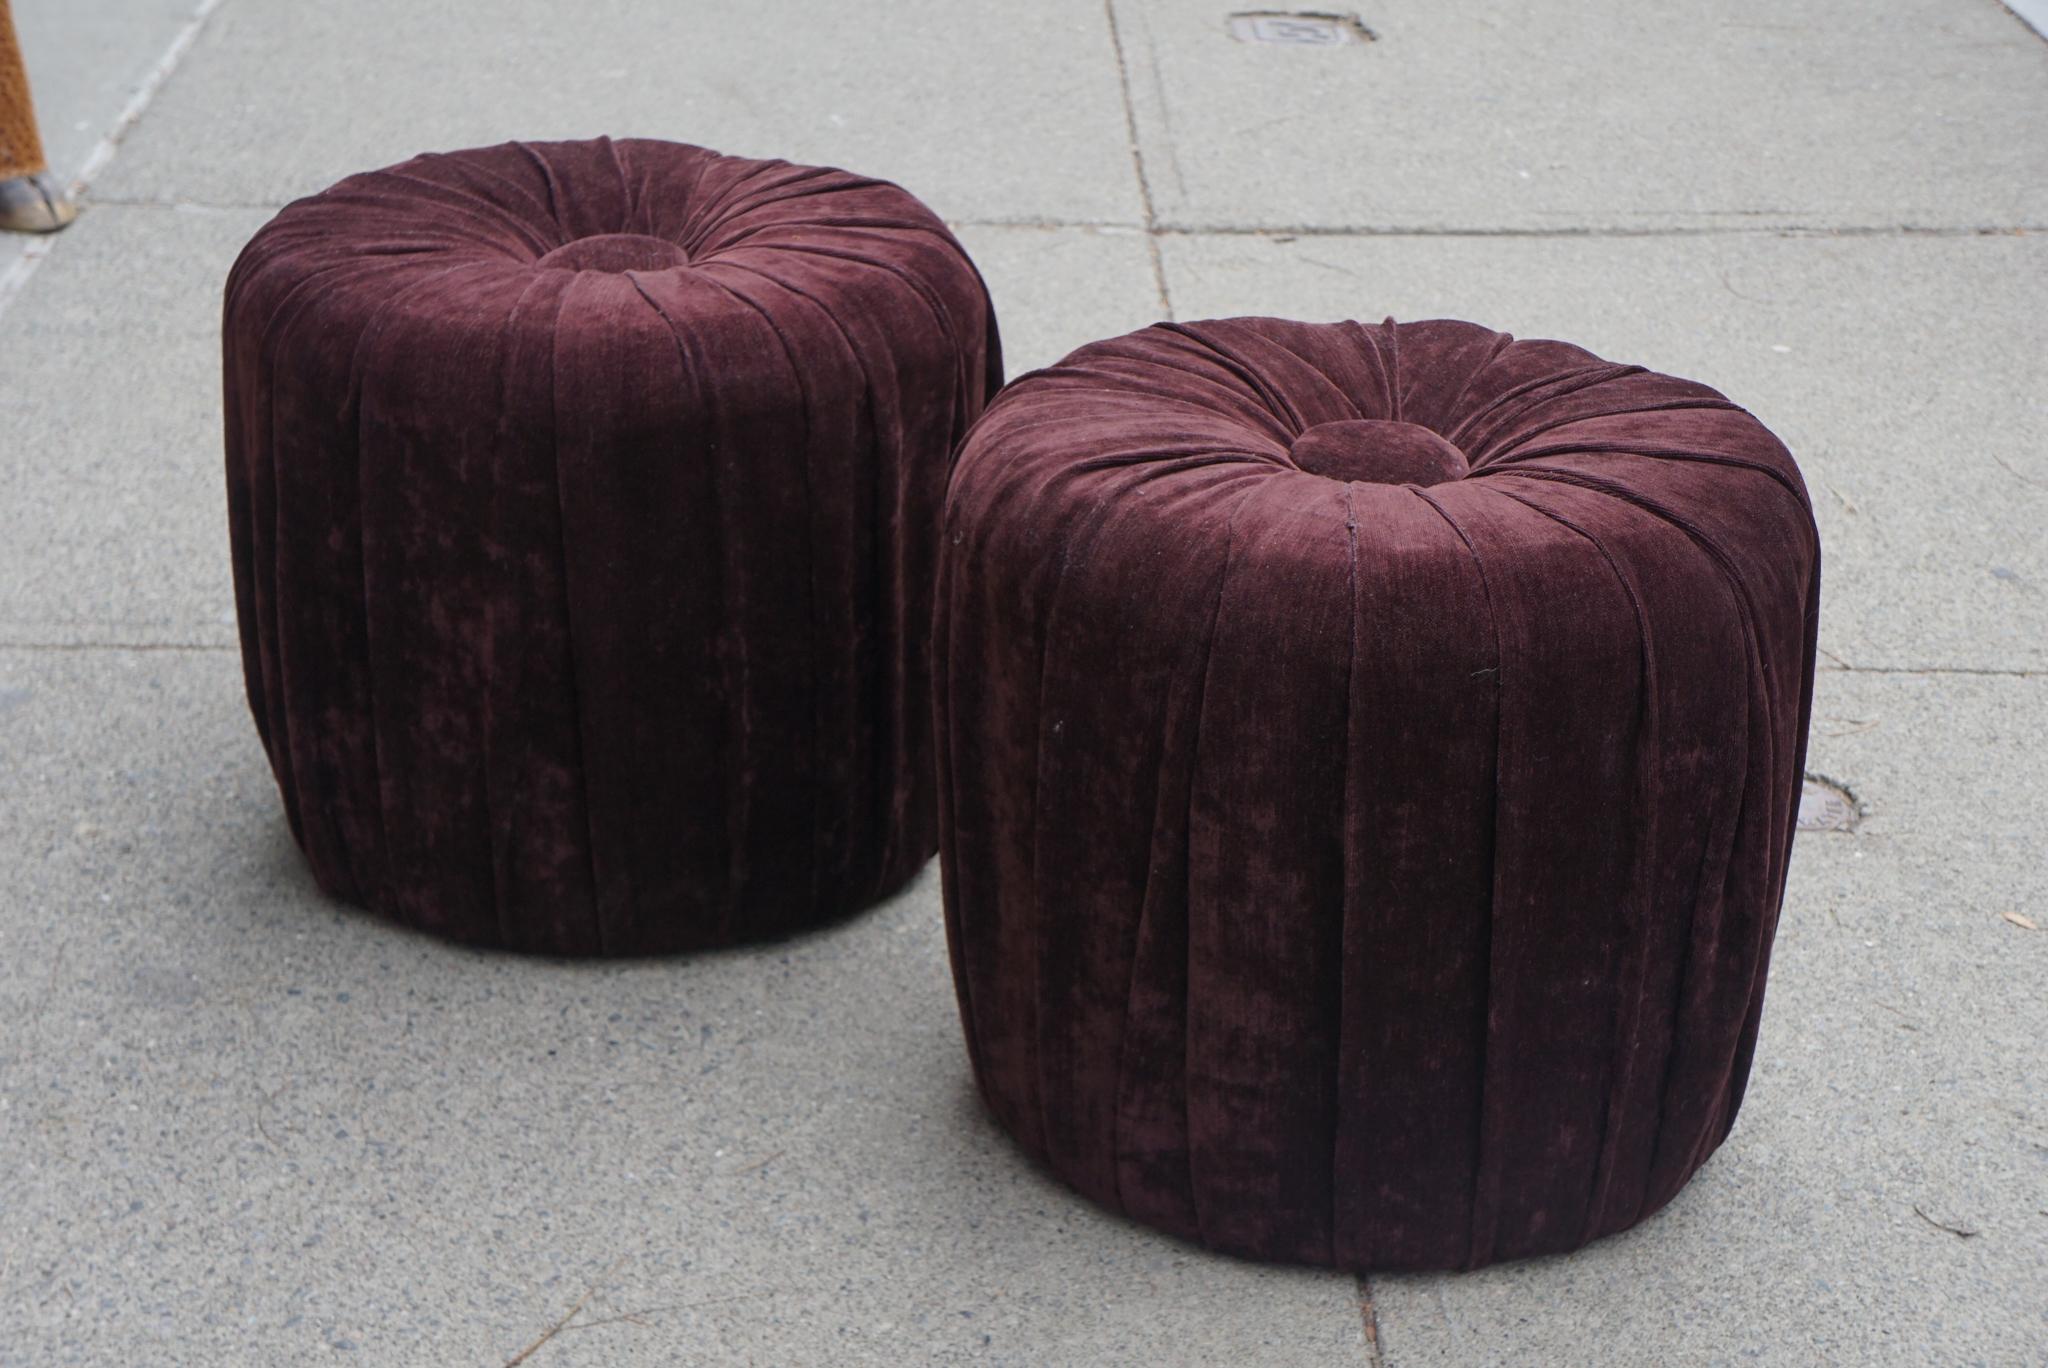 This pair of vintage puffs are upholstered in a rich purple velvet. Hip but practical they can rest grouped under a console or as a color splash in the corners of a room. Made circa the mid 1970s these are perfect small seating used at parties or as